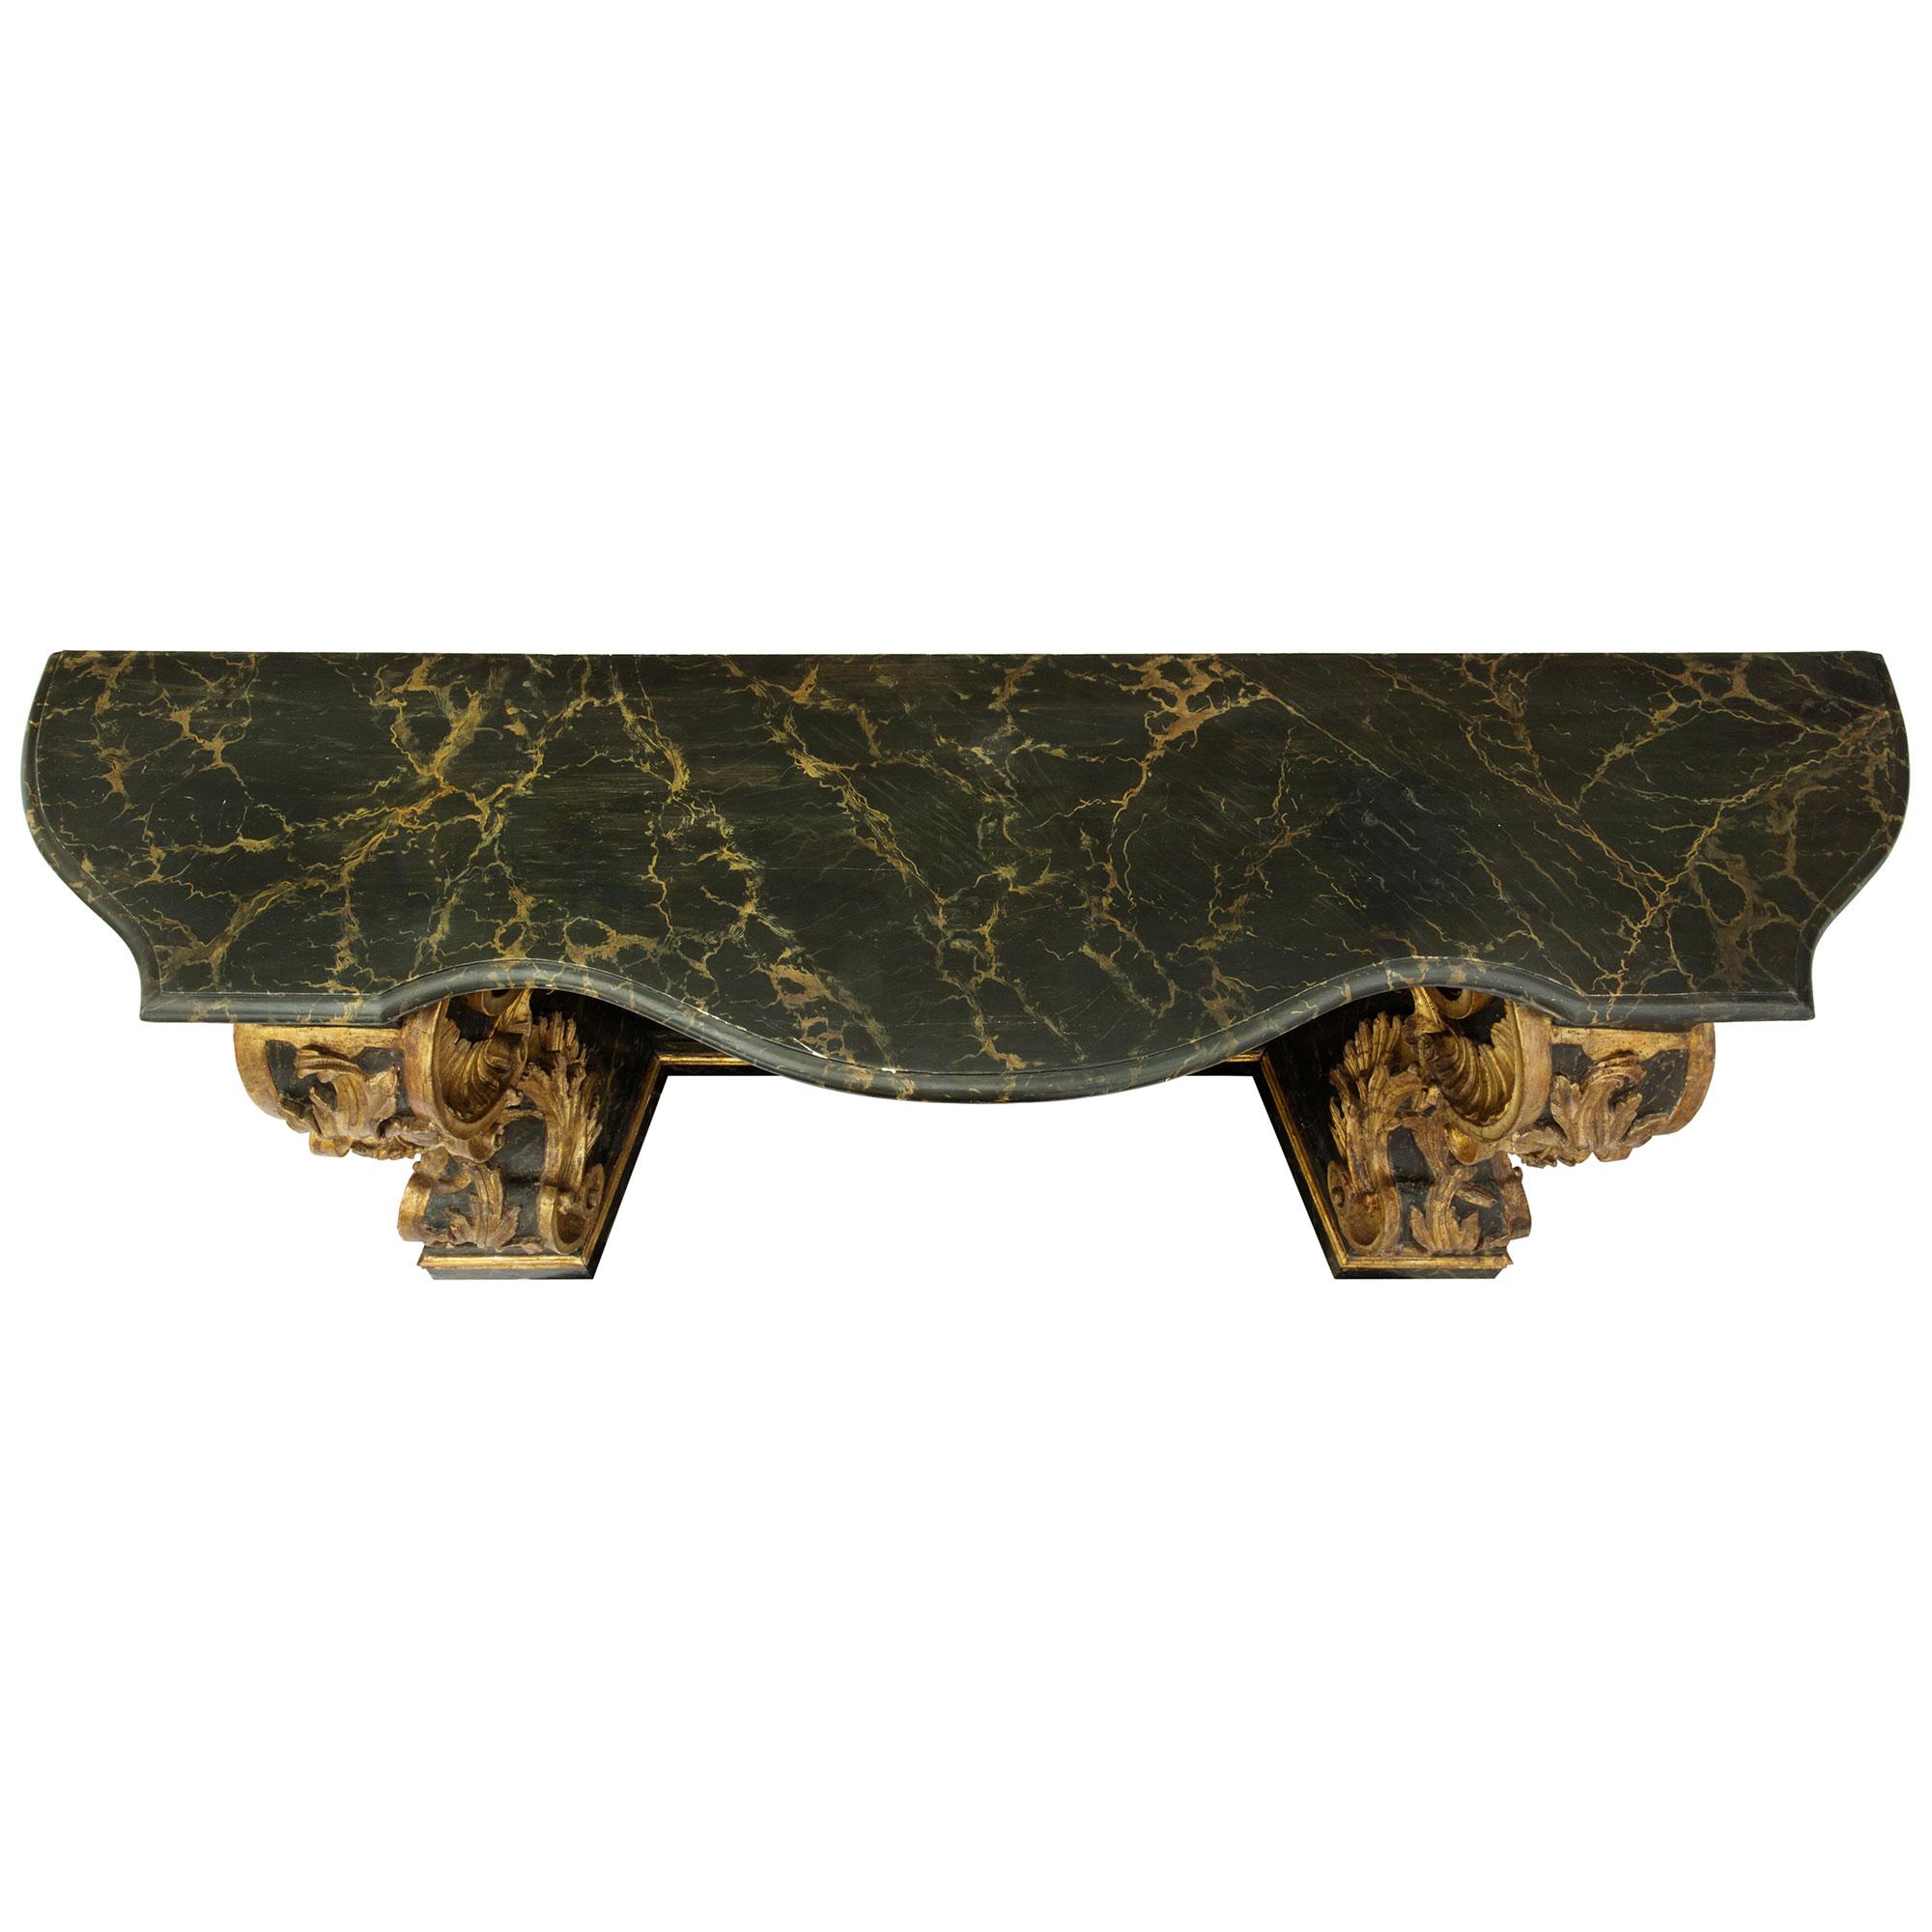 Patinated Italian Late 18th Century Faux Painted Vert Doral Marble and Mecca Console For Sale